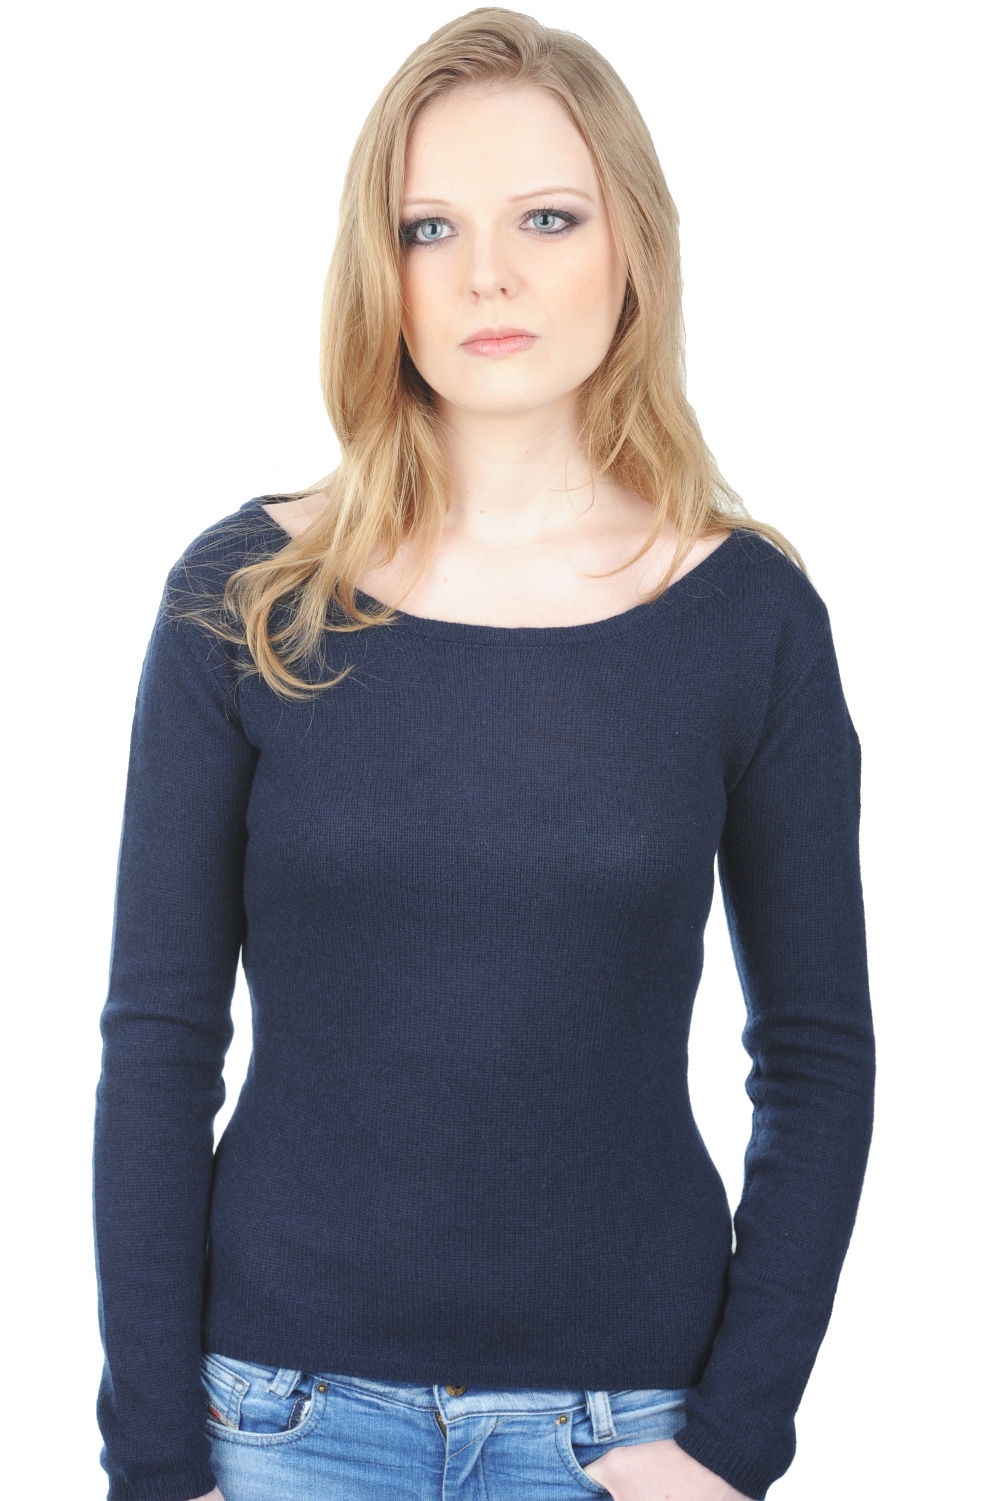 Cashmere ladies basic sweaters at low prices caleen dress blue l